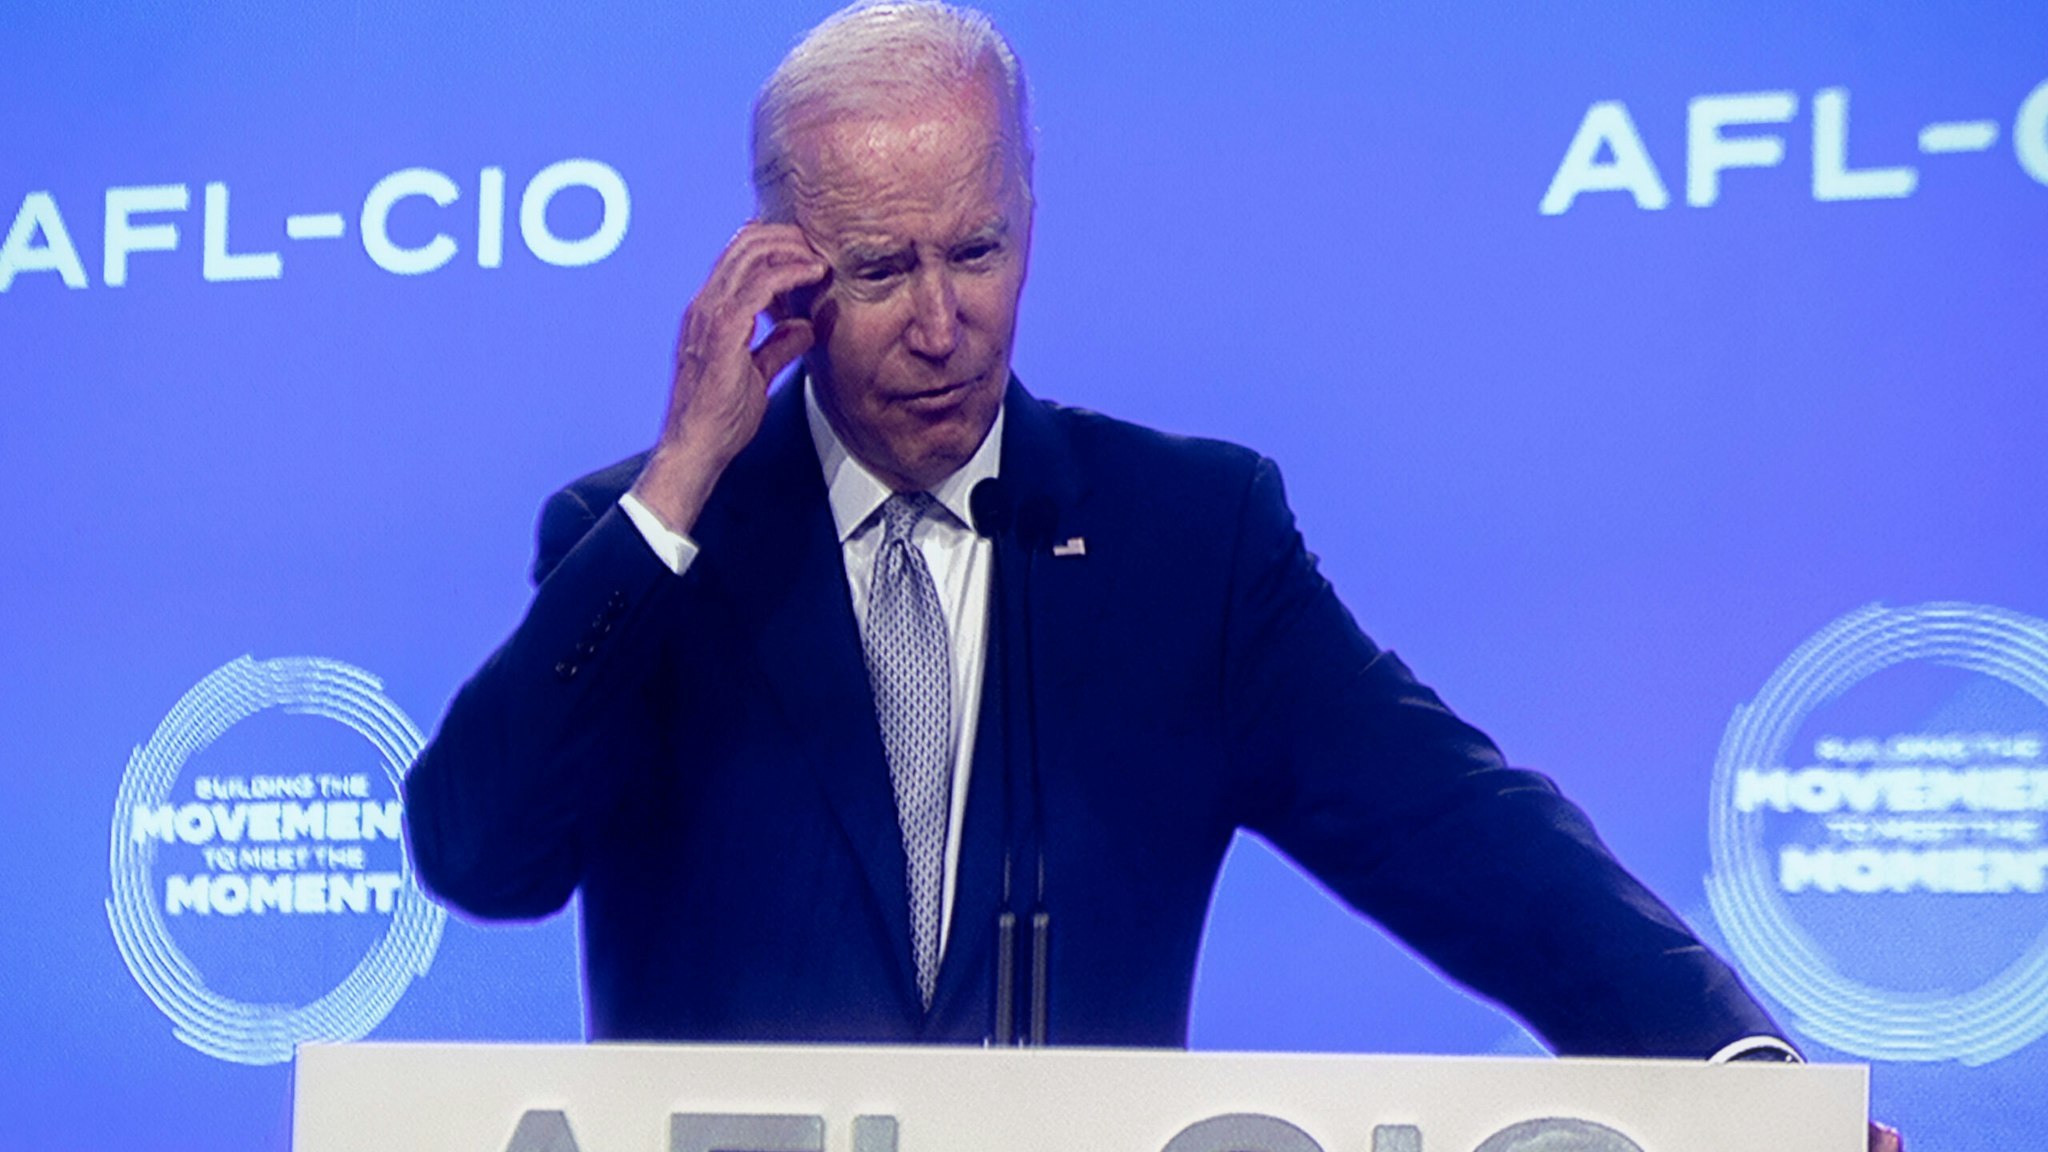 President Biden joked that his old boss, President Obama, once told him to "fix Detroit."